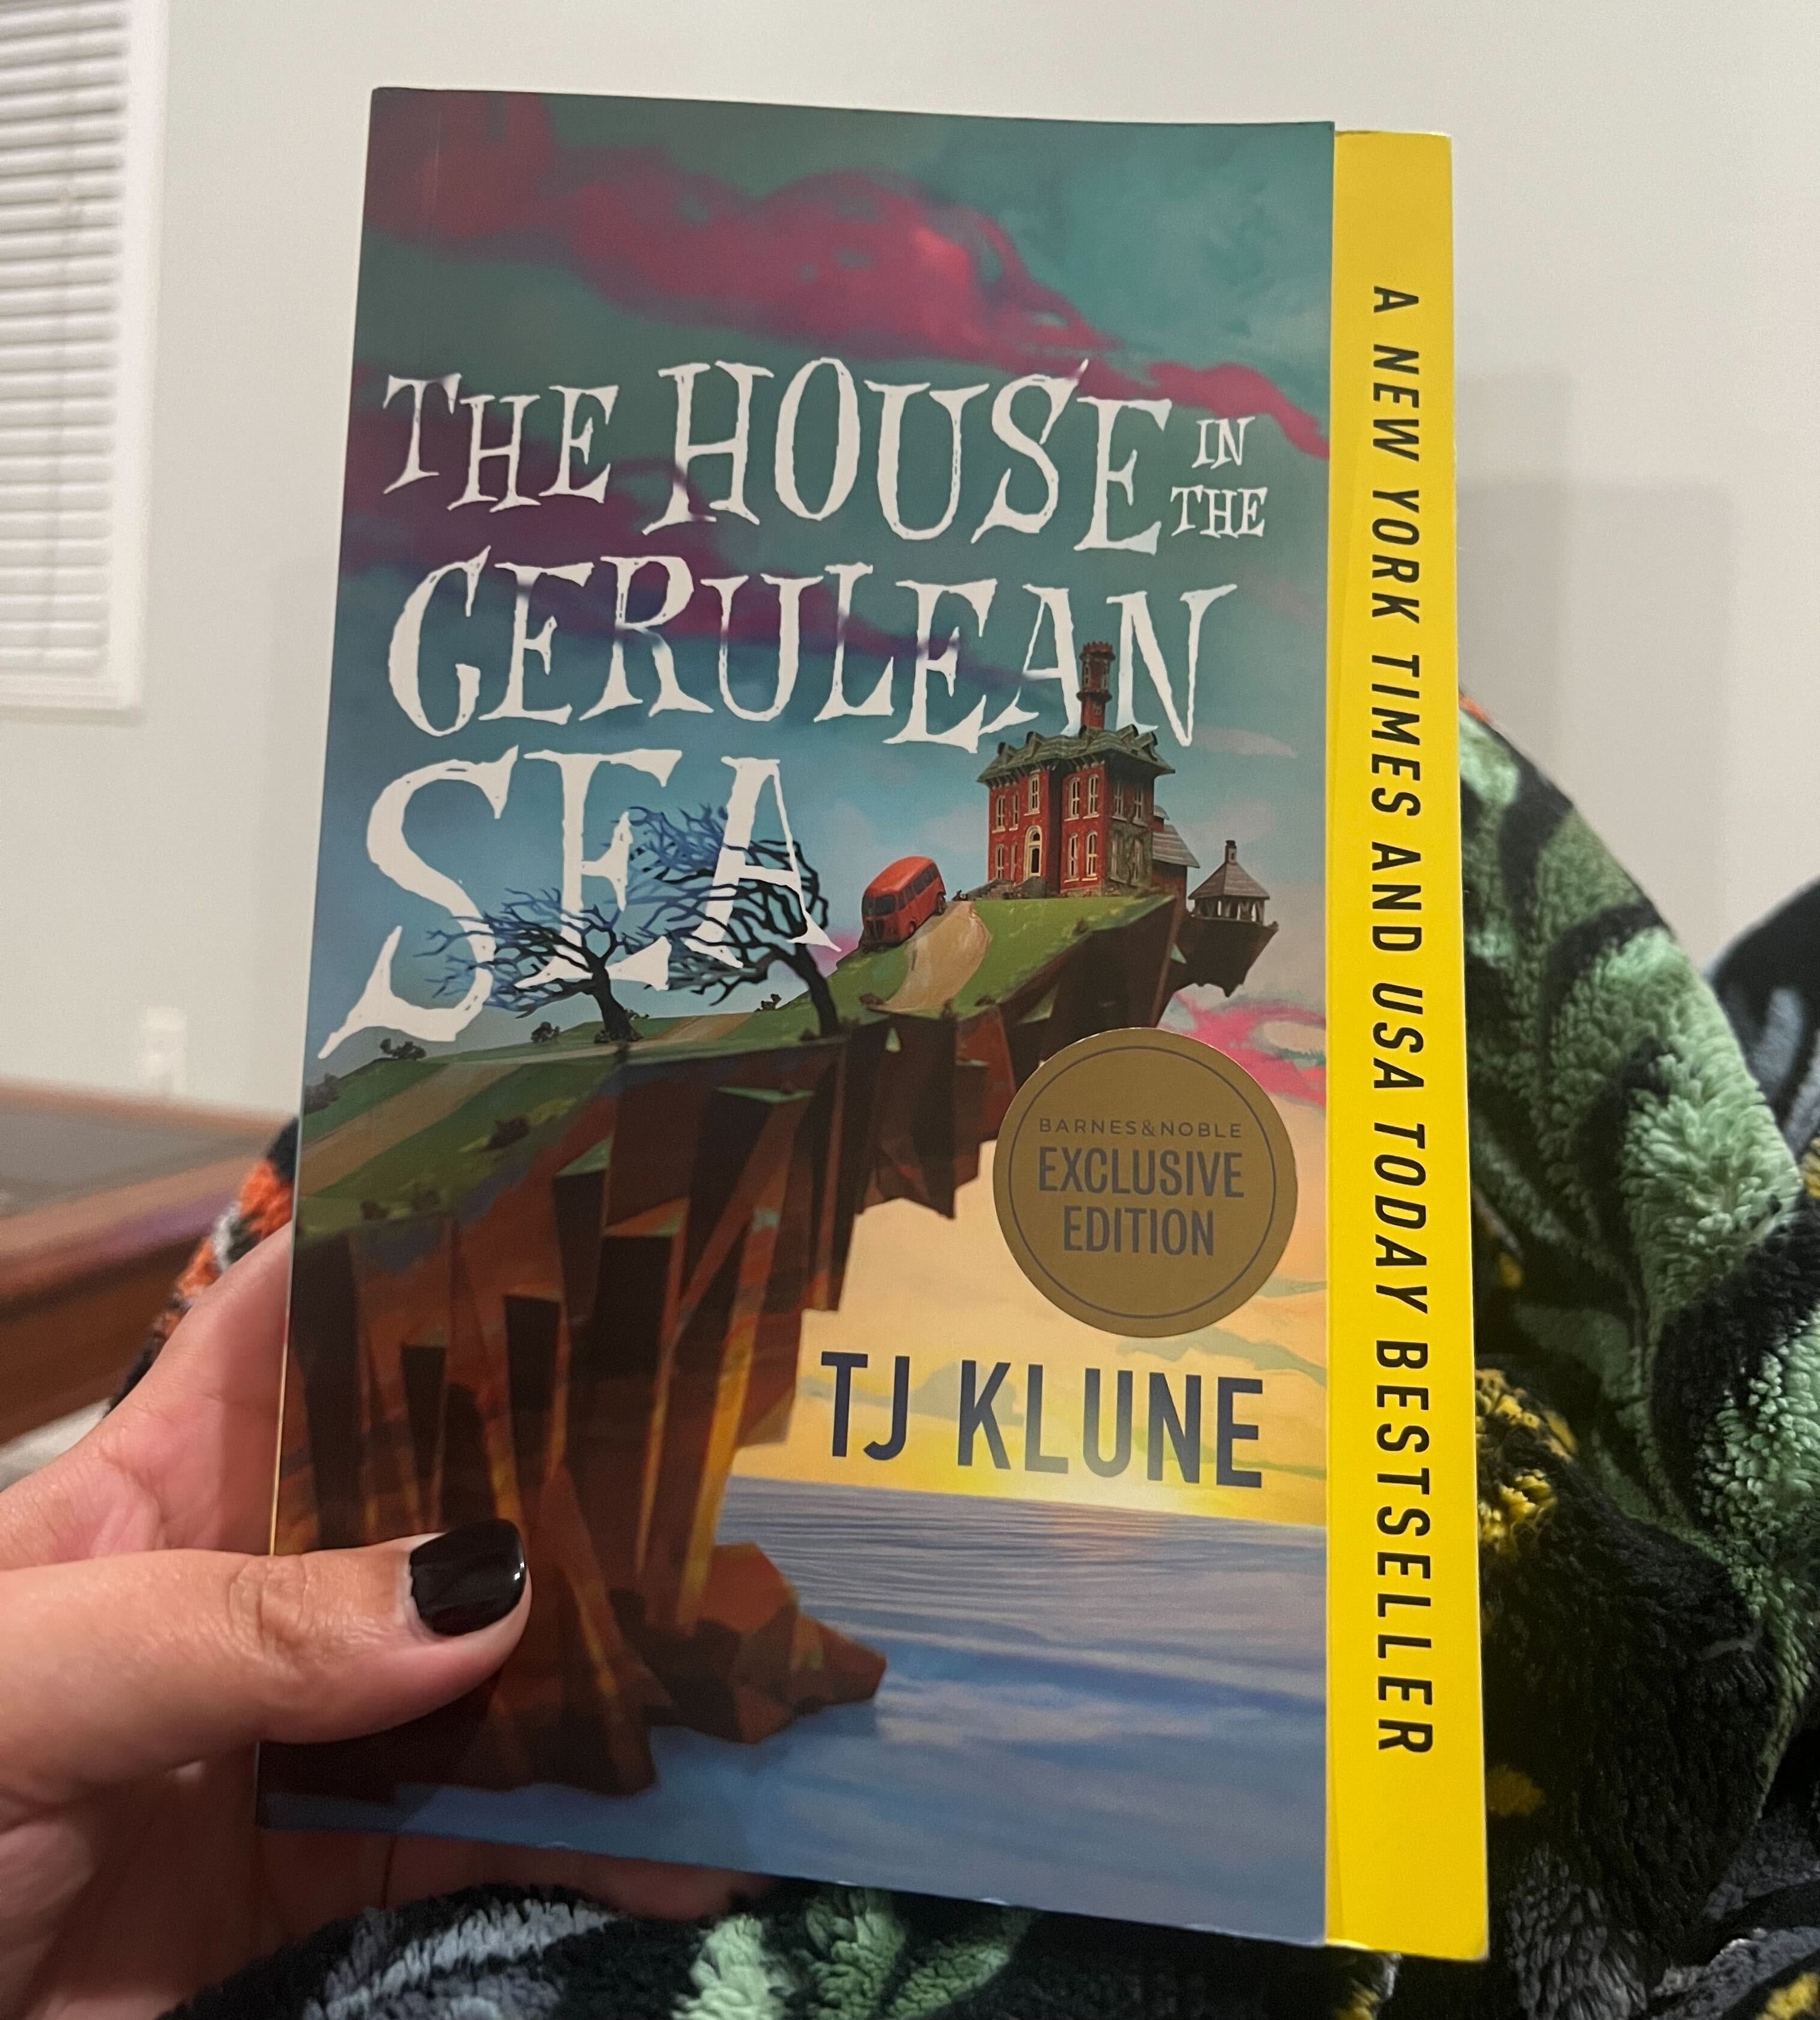 The author is holding a copy of &quot;The House in the Cerulean Sea&quot; by TJ Klune